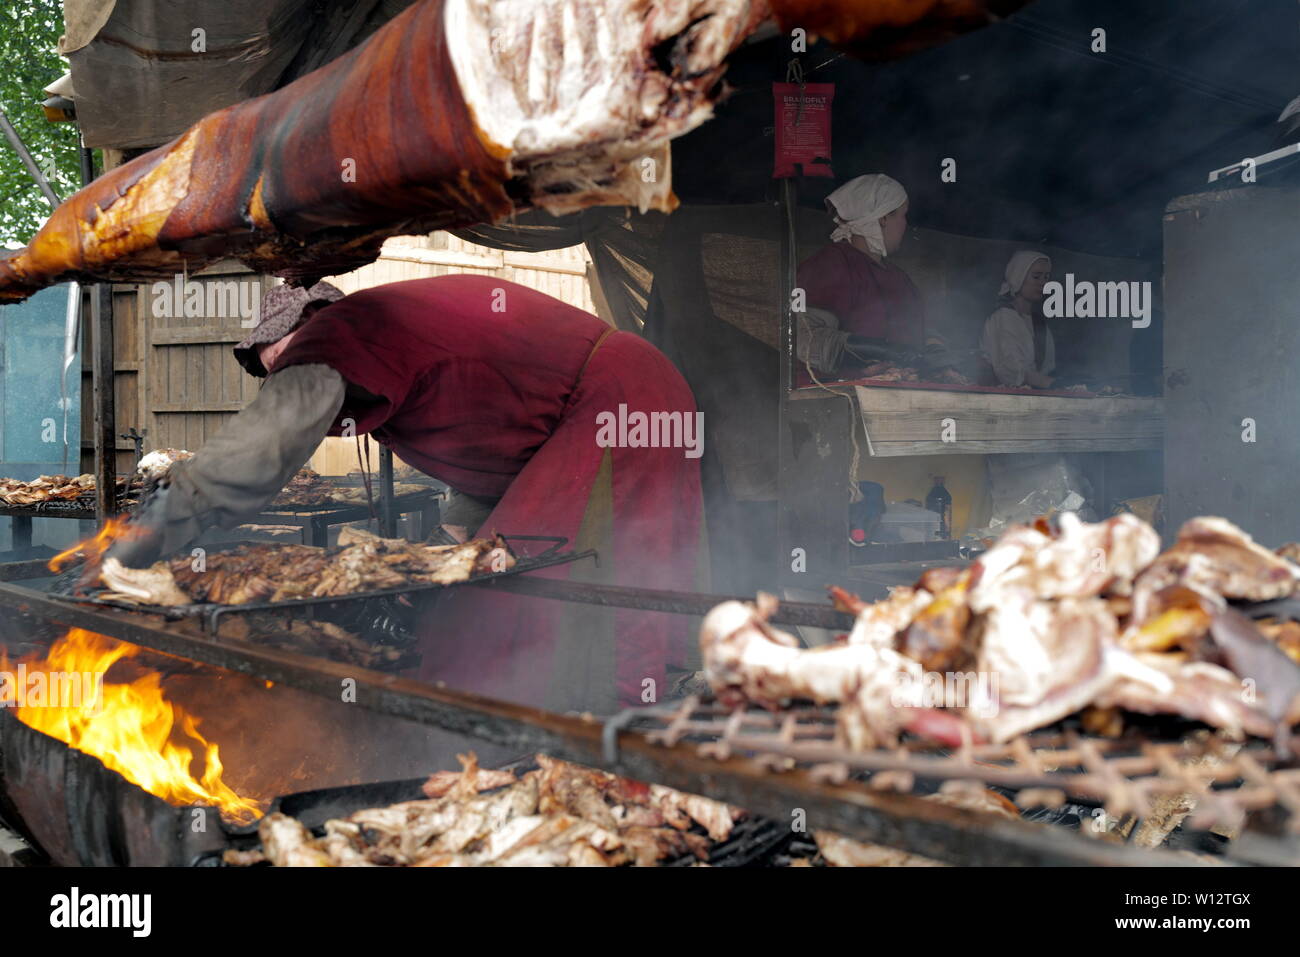 Turku, Finland. 29th June, 2019. Vendors prepare roast pork with ancient recipe in Turku, southwestern Finland, on June 29, 2019. The annual Medieval Market, one of the largest historical events in Finland, is held in Turku from June 27 to June 30. Modern people can enjoy ancient music and dance, historical street plays, traditional food and handicrafts during the event. Credit: Zhang Xuan/Xinhua/Alamy Live News Stock Photo